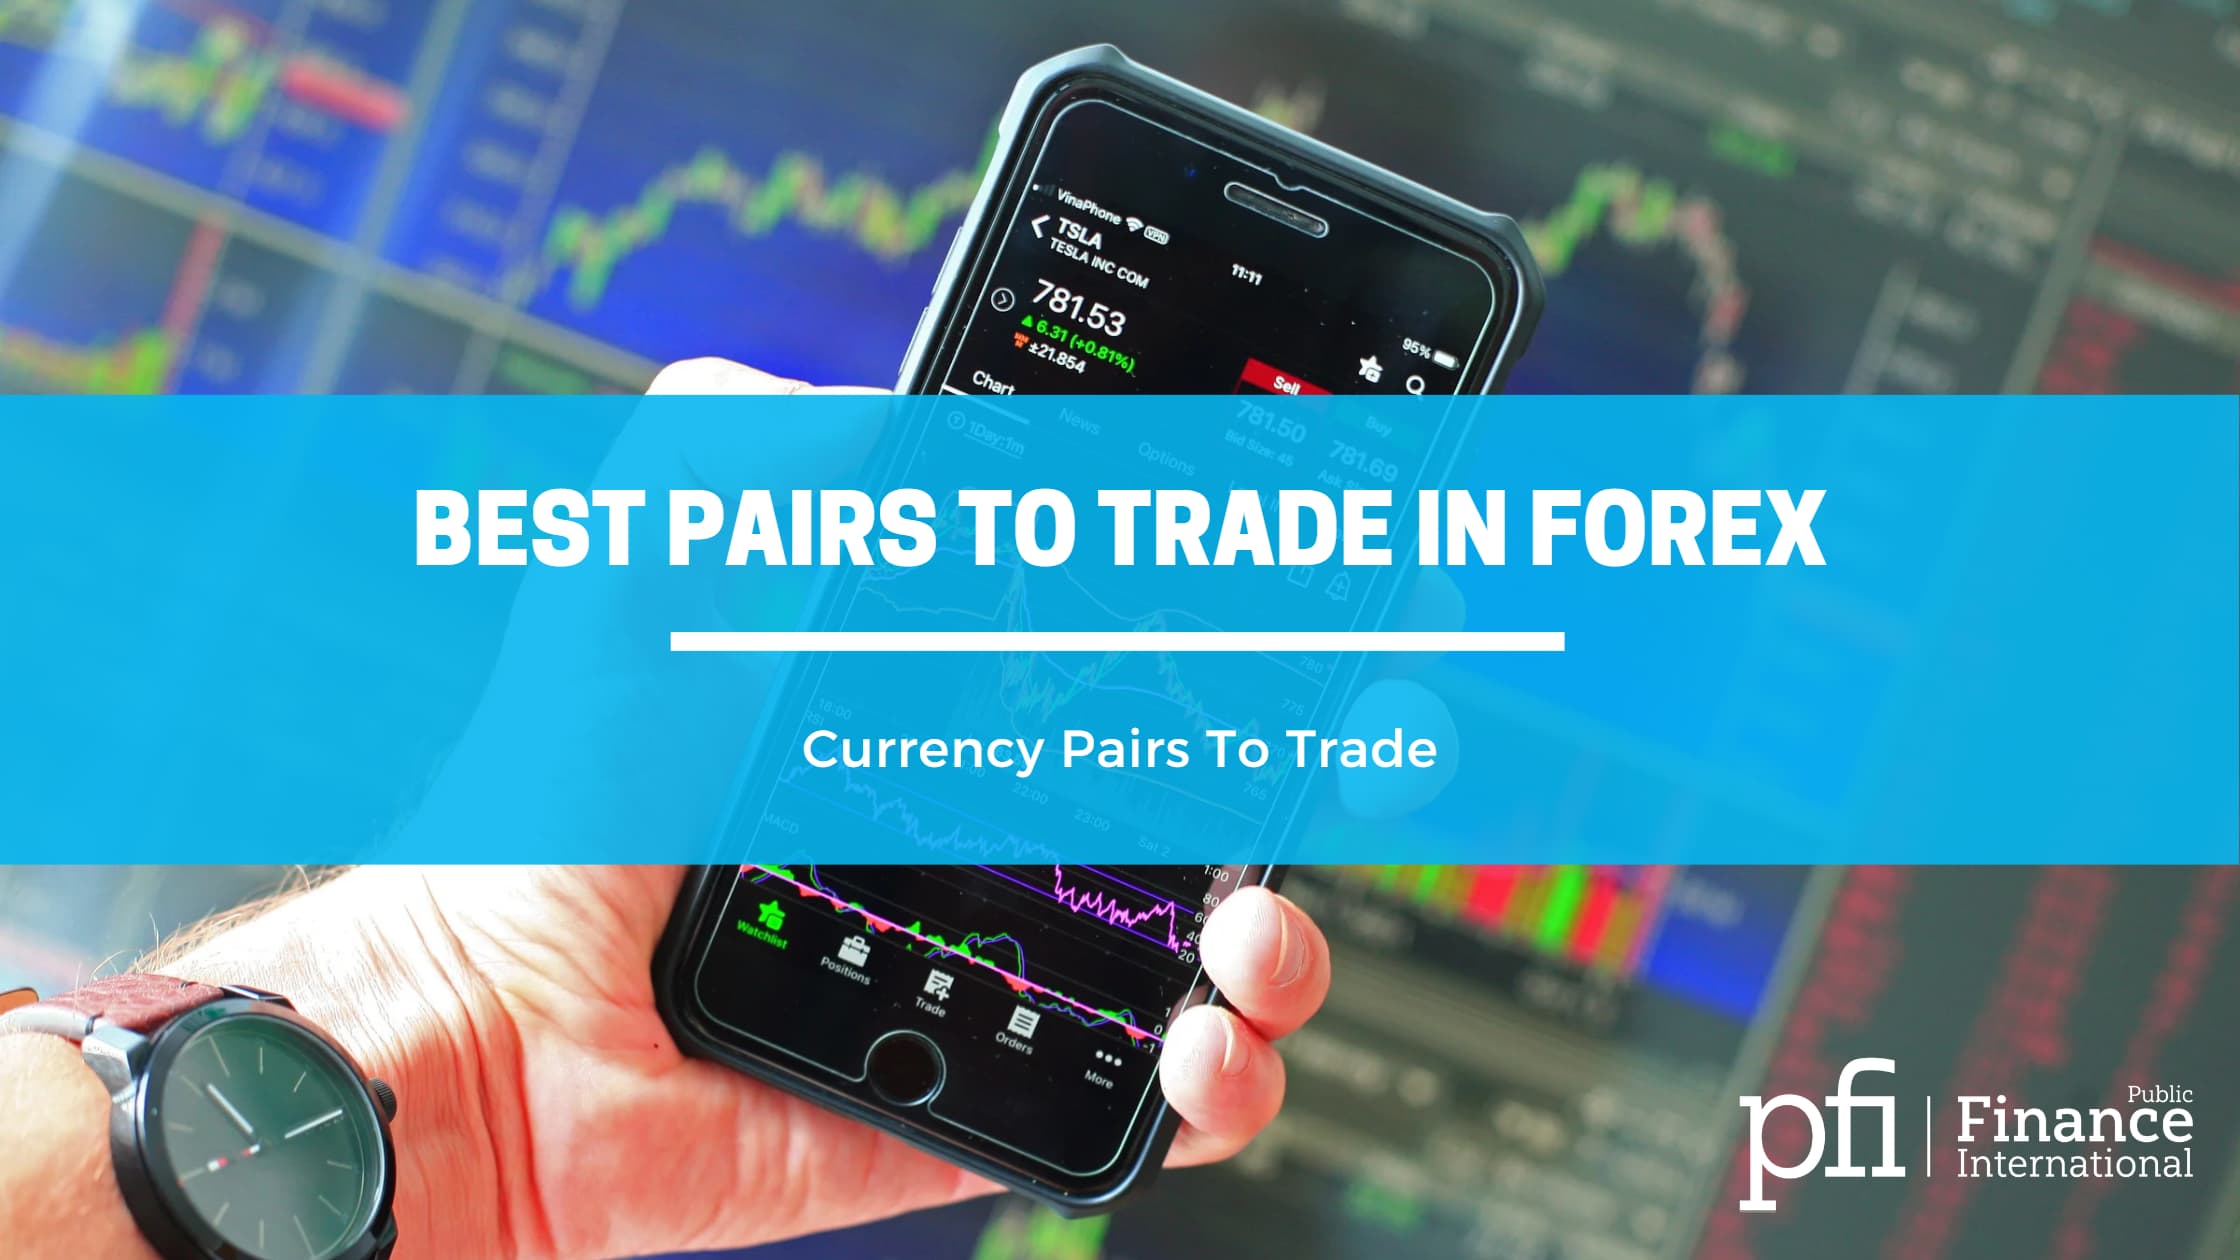 Top Currency Pairs In Forex